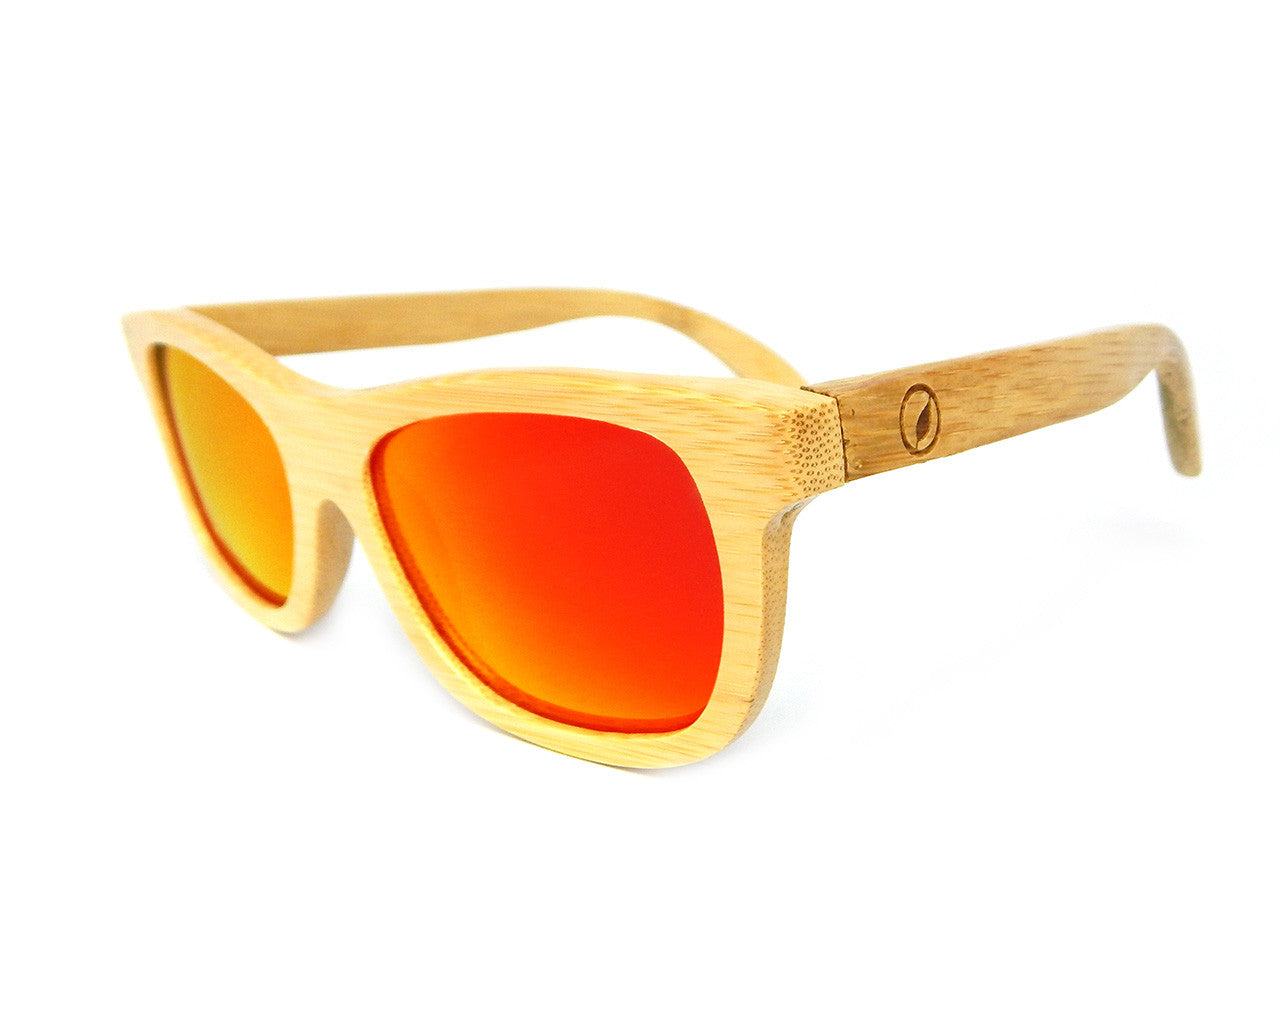 Bamboo Sunglasses Red Mirror BSN03 - Natural Clothes Bamboo Clothing & Accessories for Men & Women 